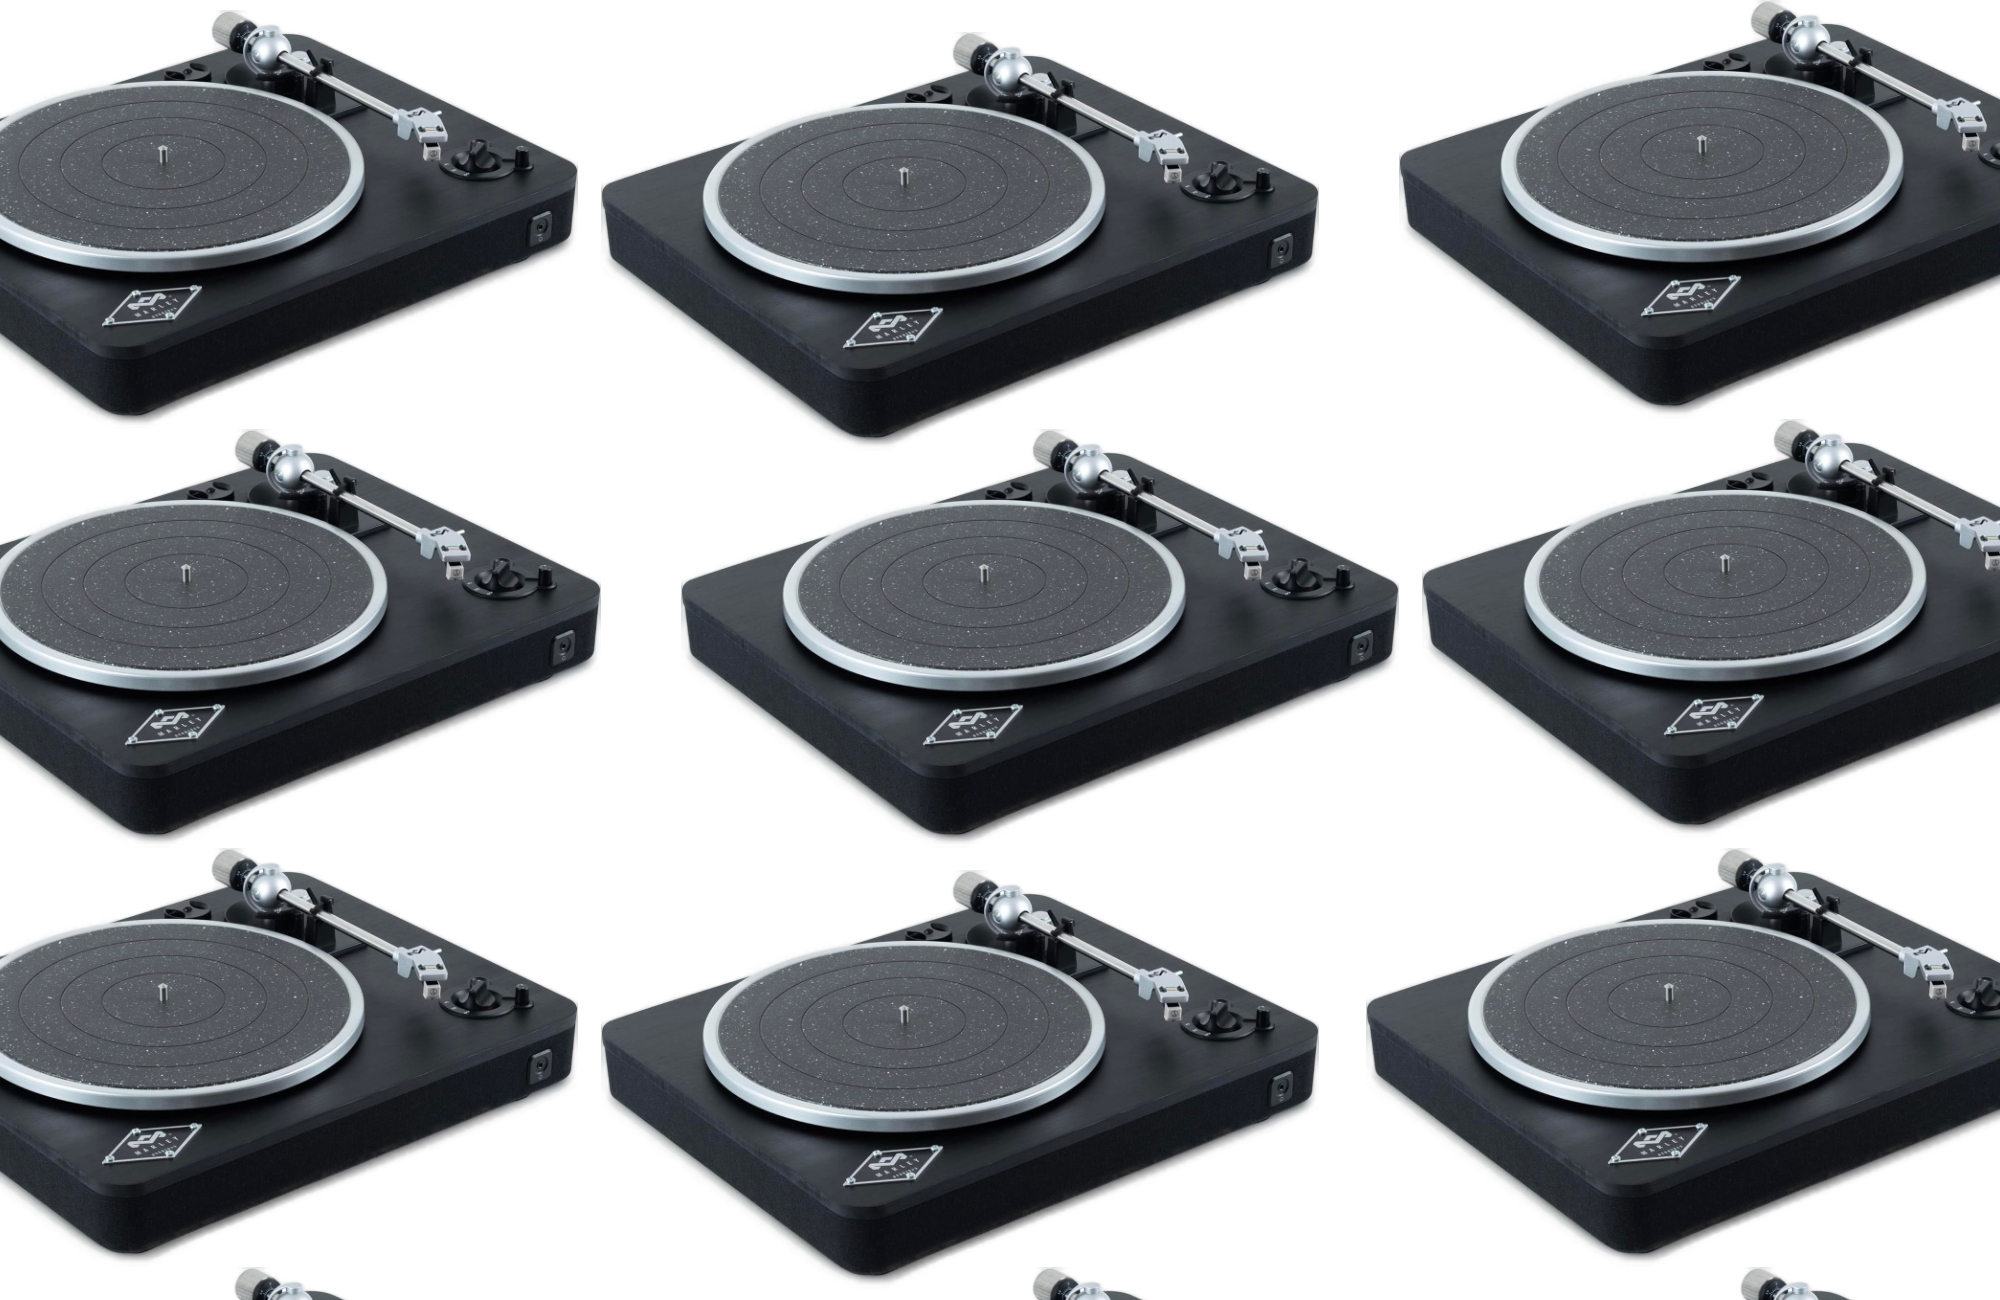 These Black Friday turntable deals are still spinning, but not for long